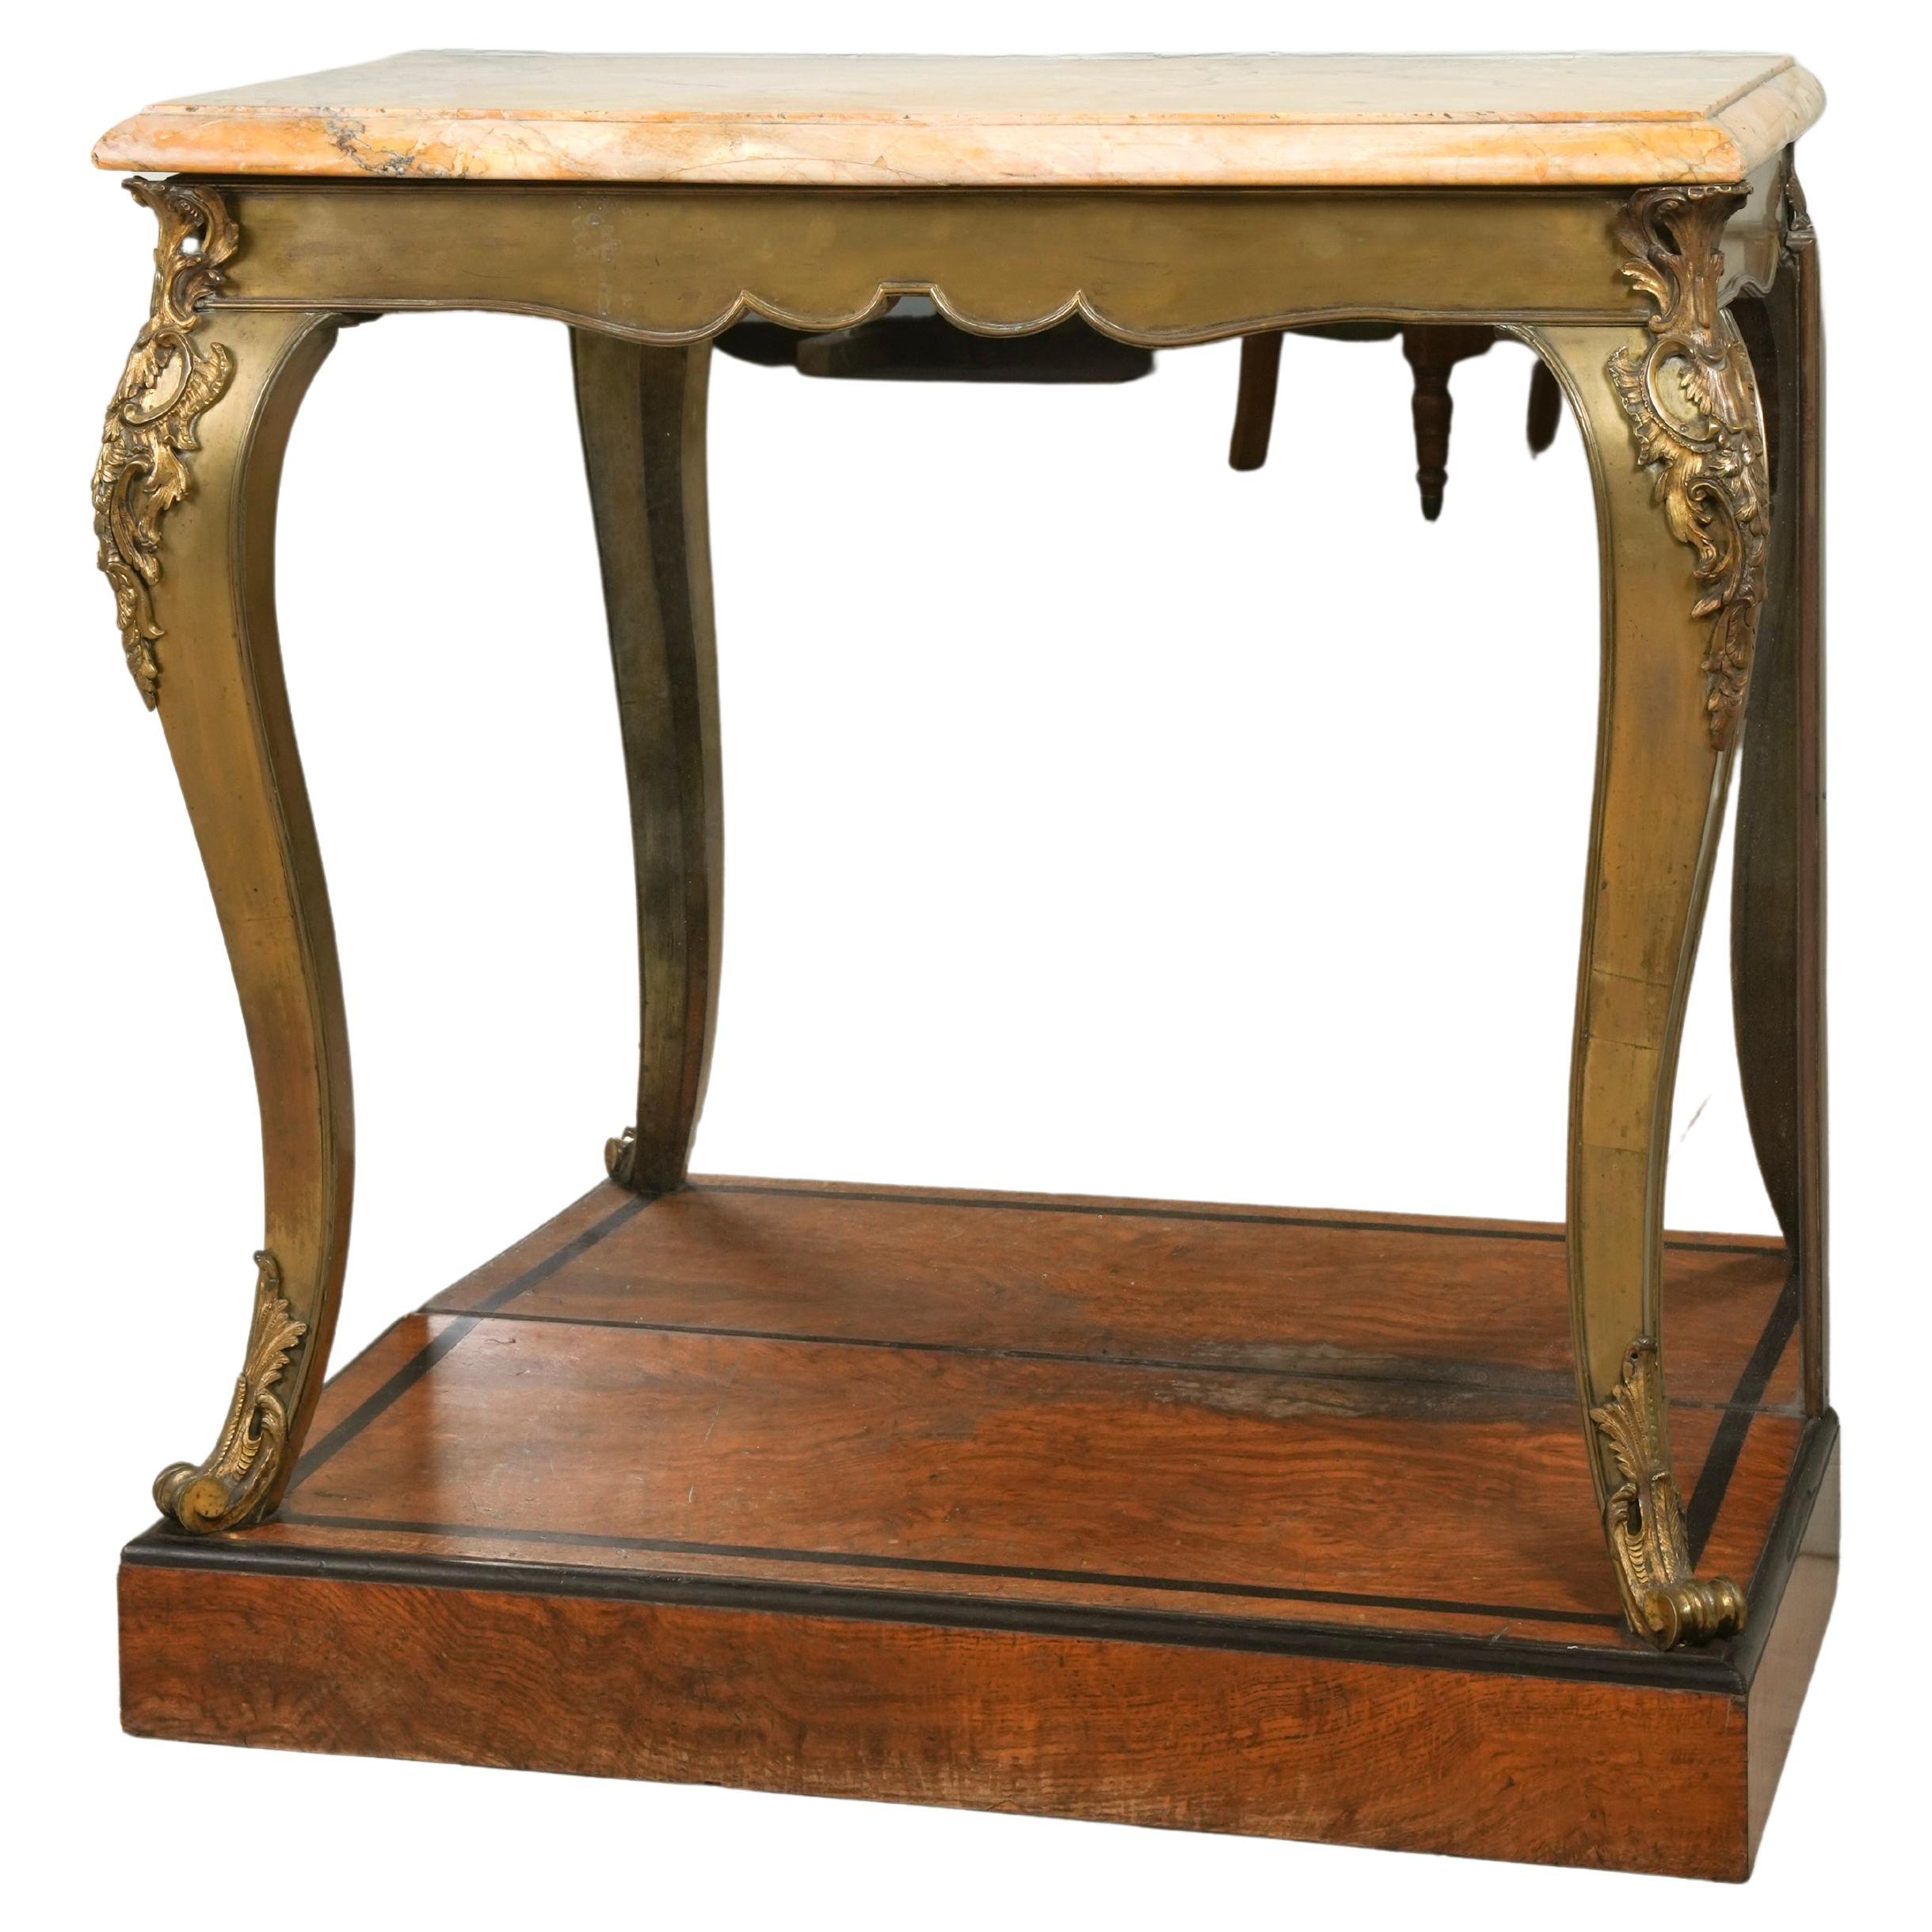 Raised on a burr elm and ebony plinth base with its original mirror plate, the bronze cabriole legs and shaped frieze below the original scagliola top, the whole in an untouched as found condition.